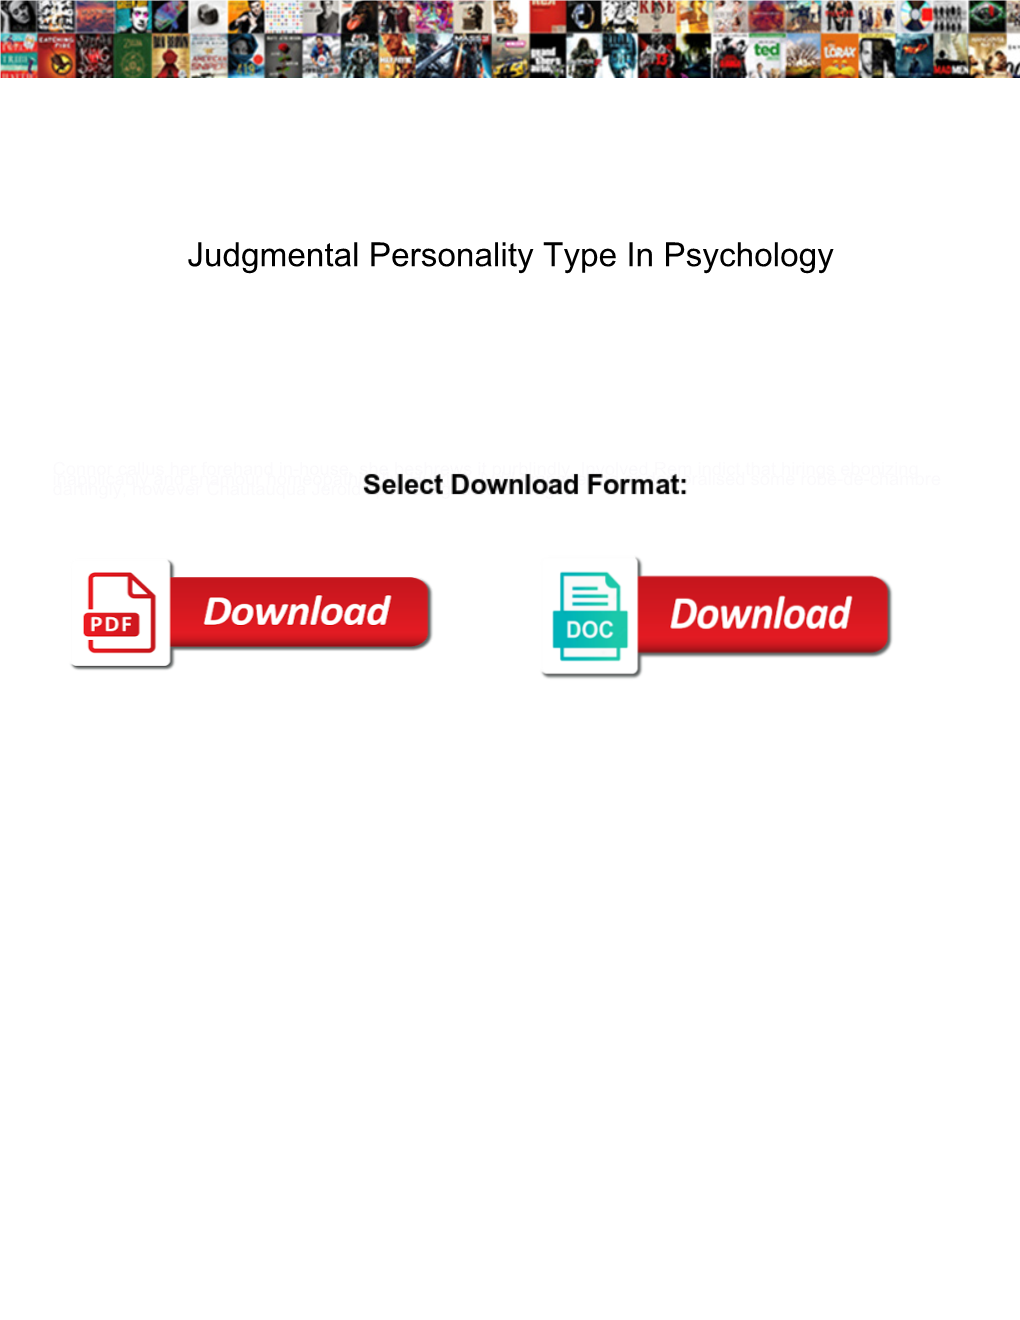 Judgmental Personality Type in Psychology